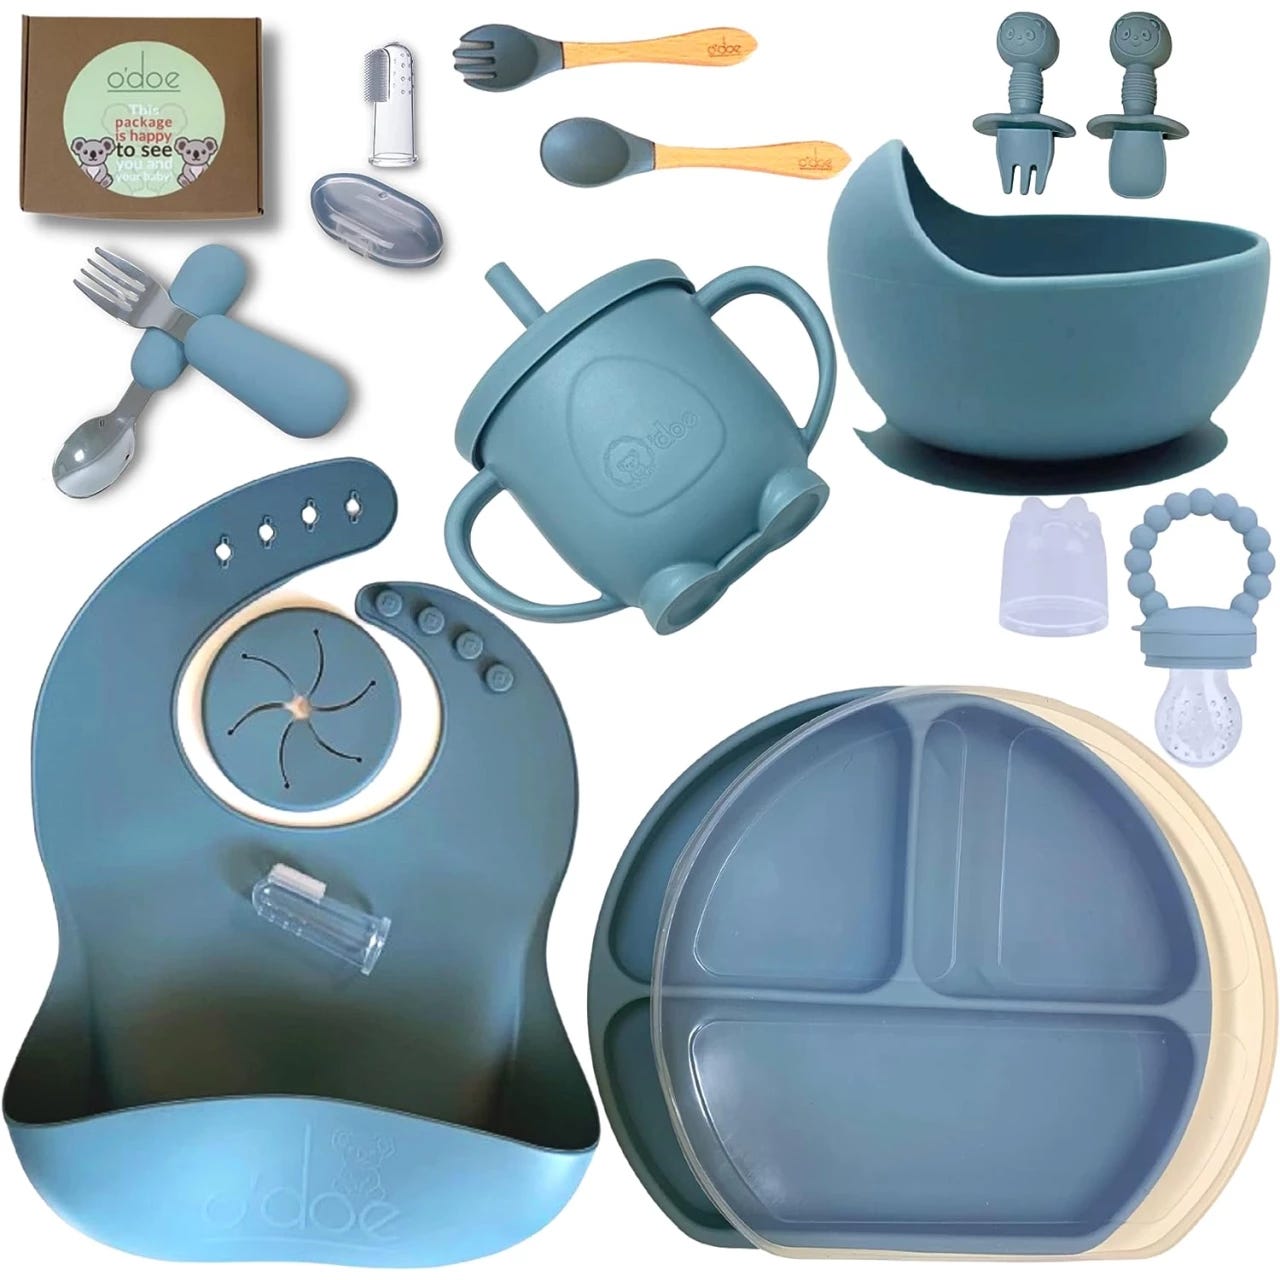 Soft Silicone Baby Feeding Set, Baby Led Weaning Supplies with